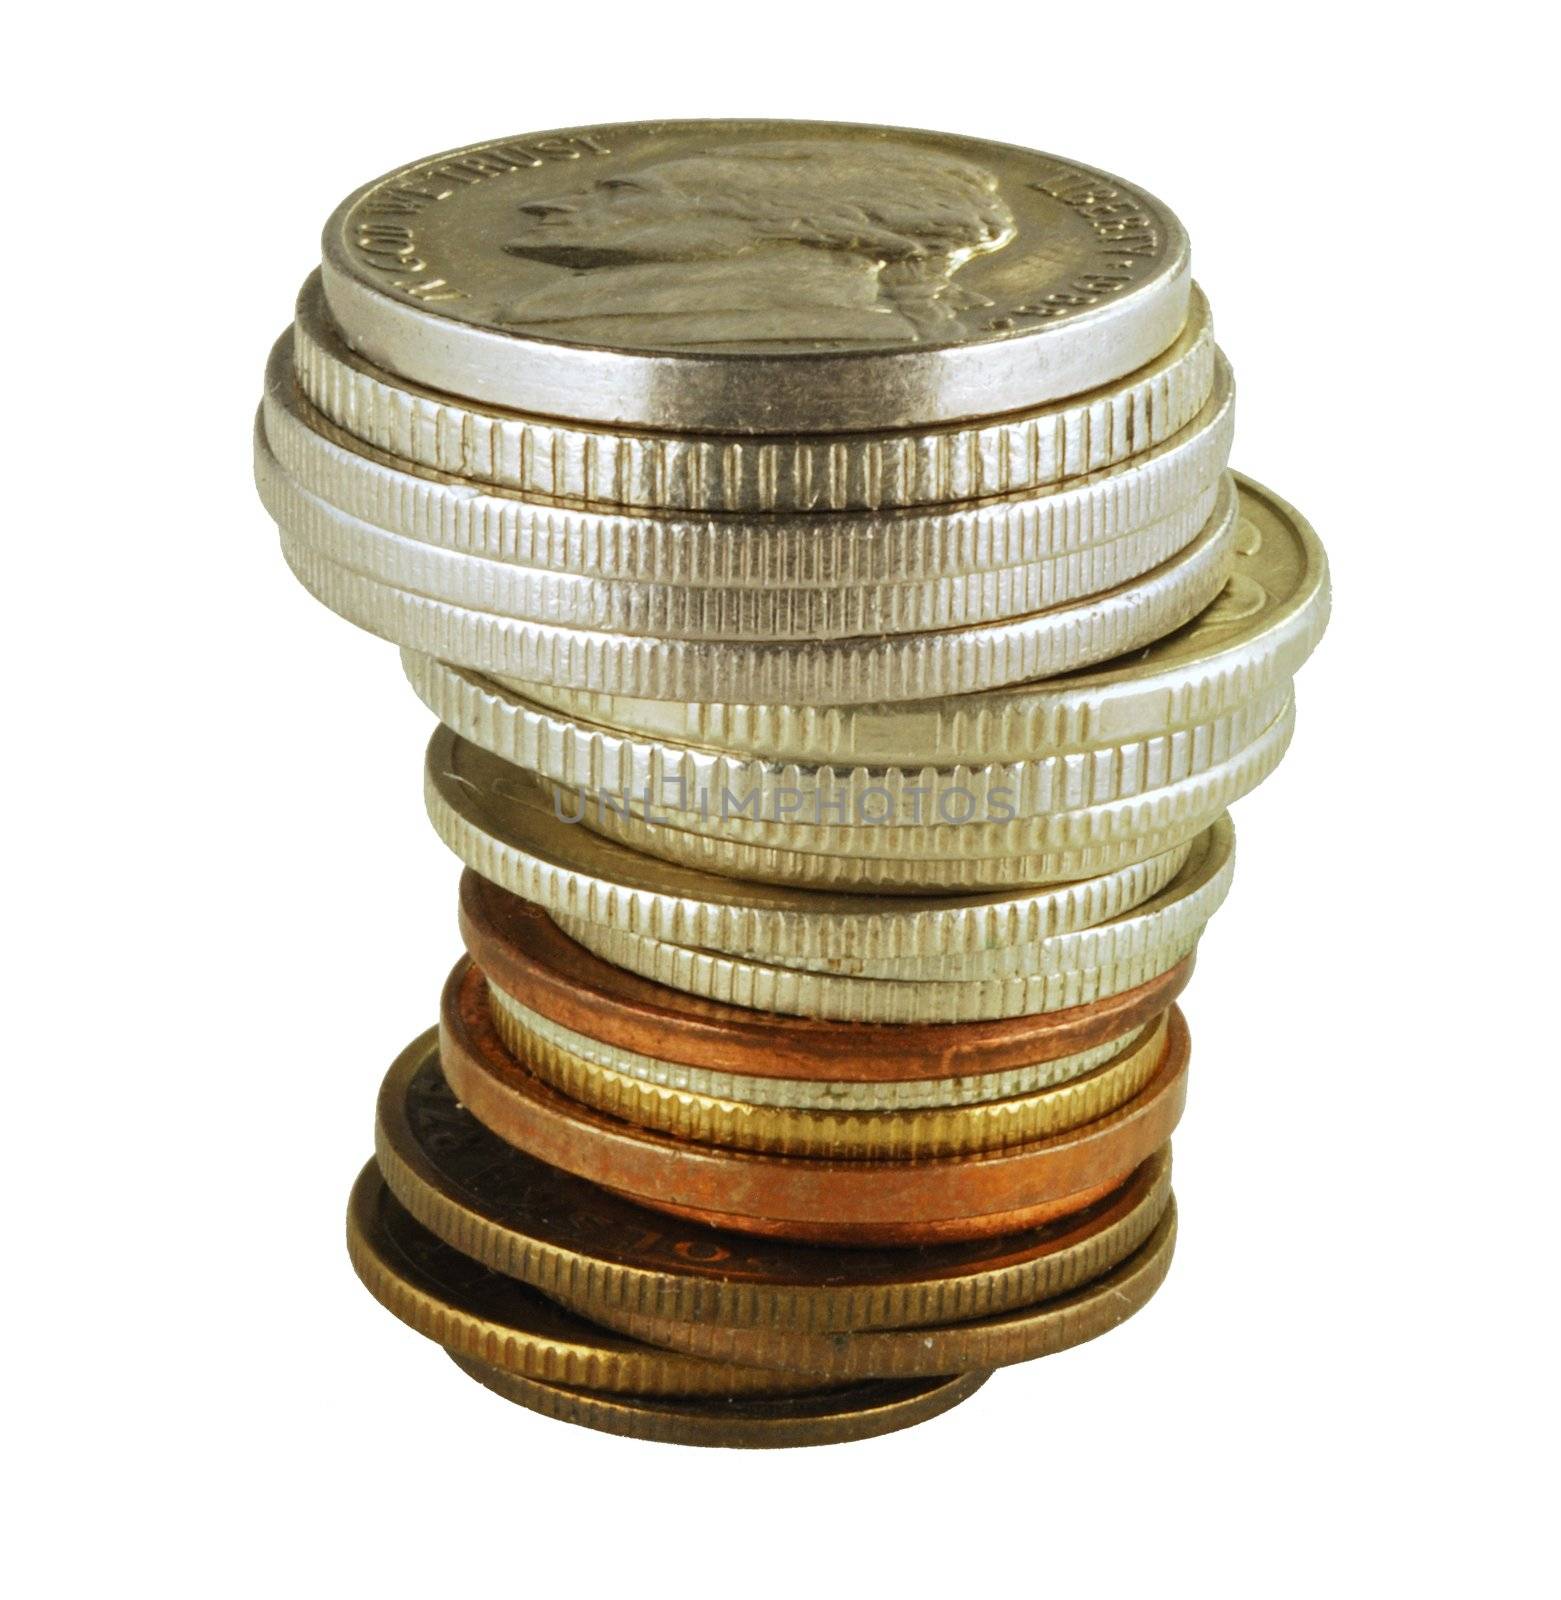 Coins tower on white background